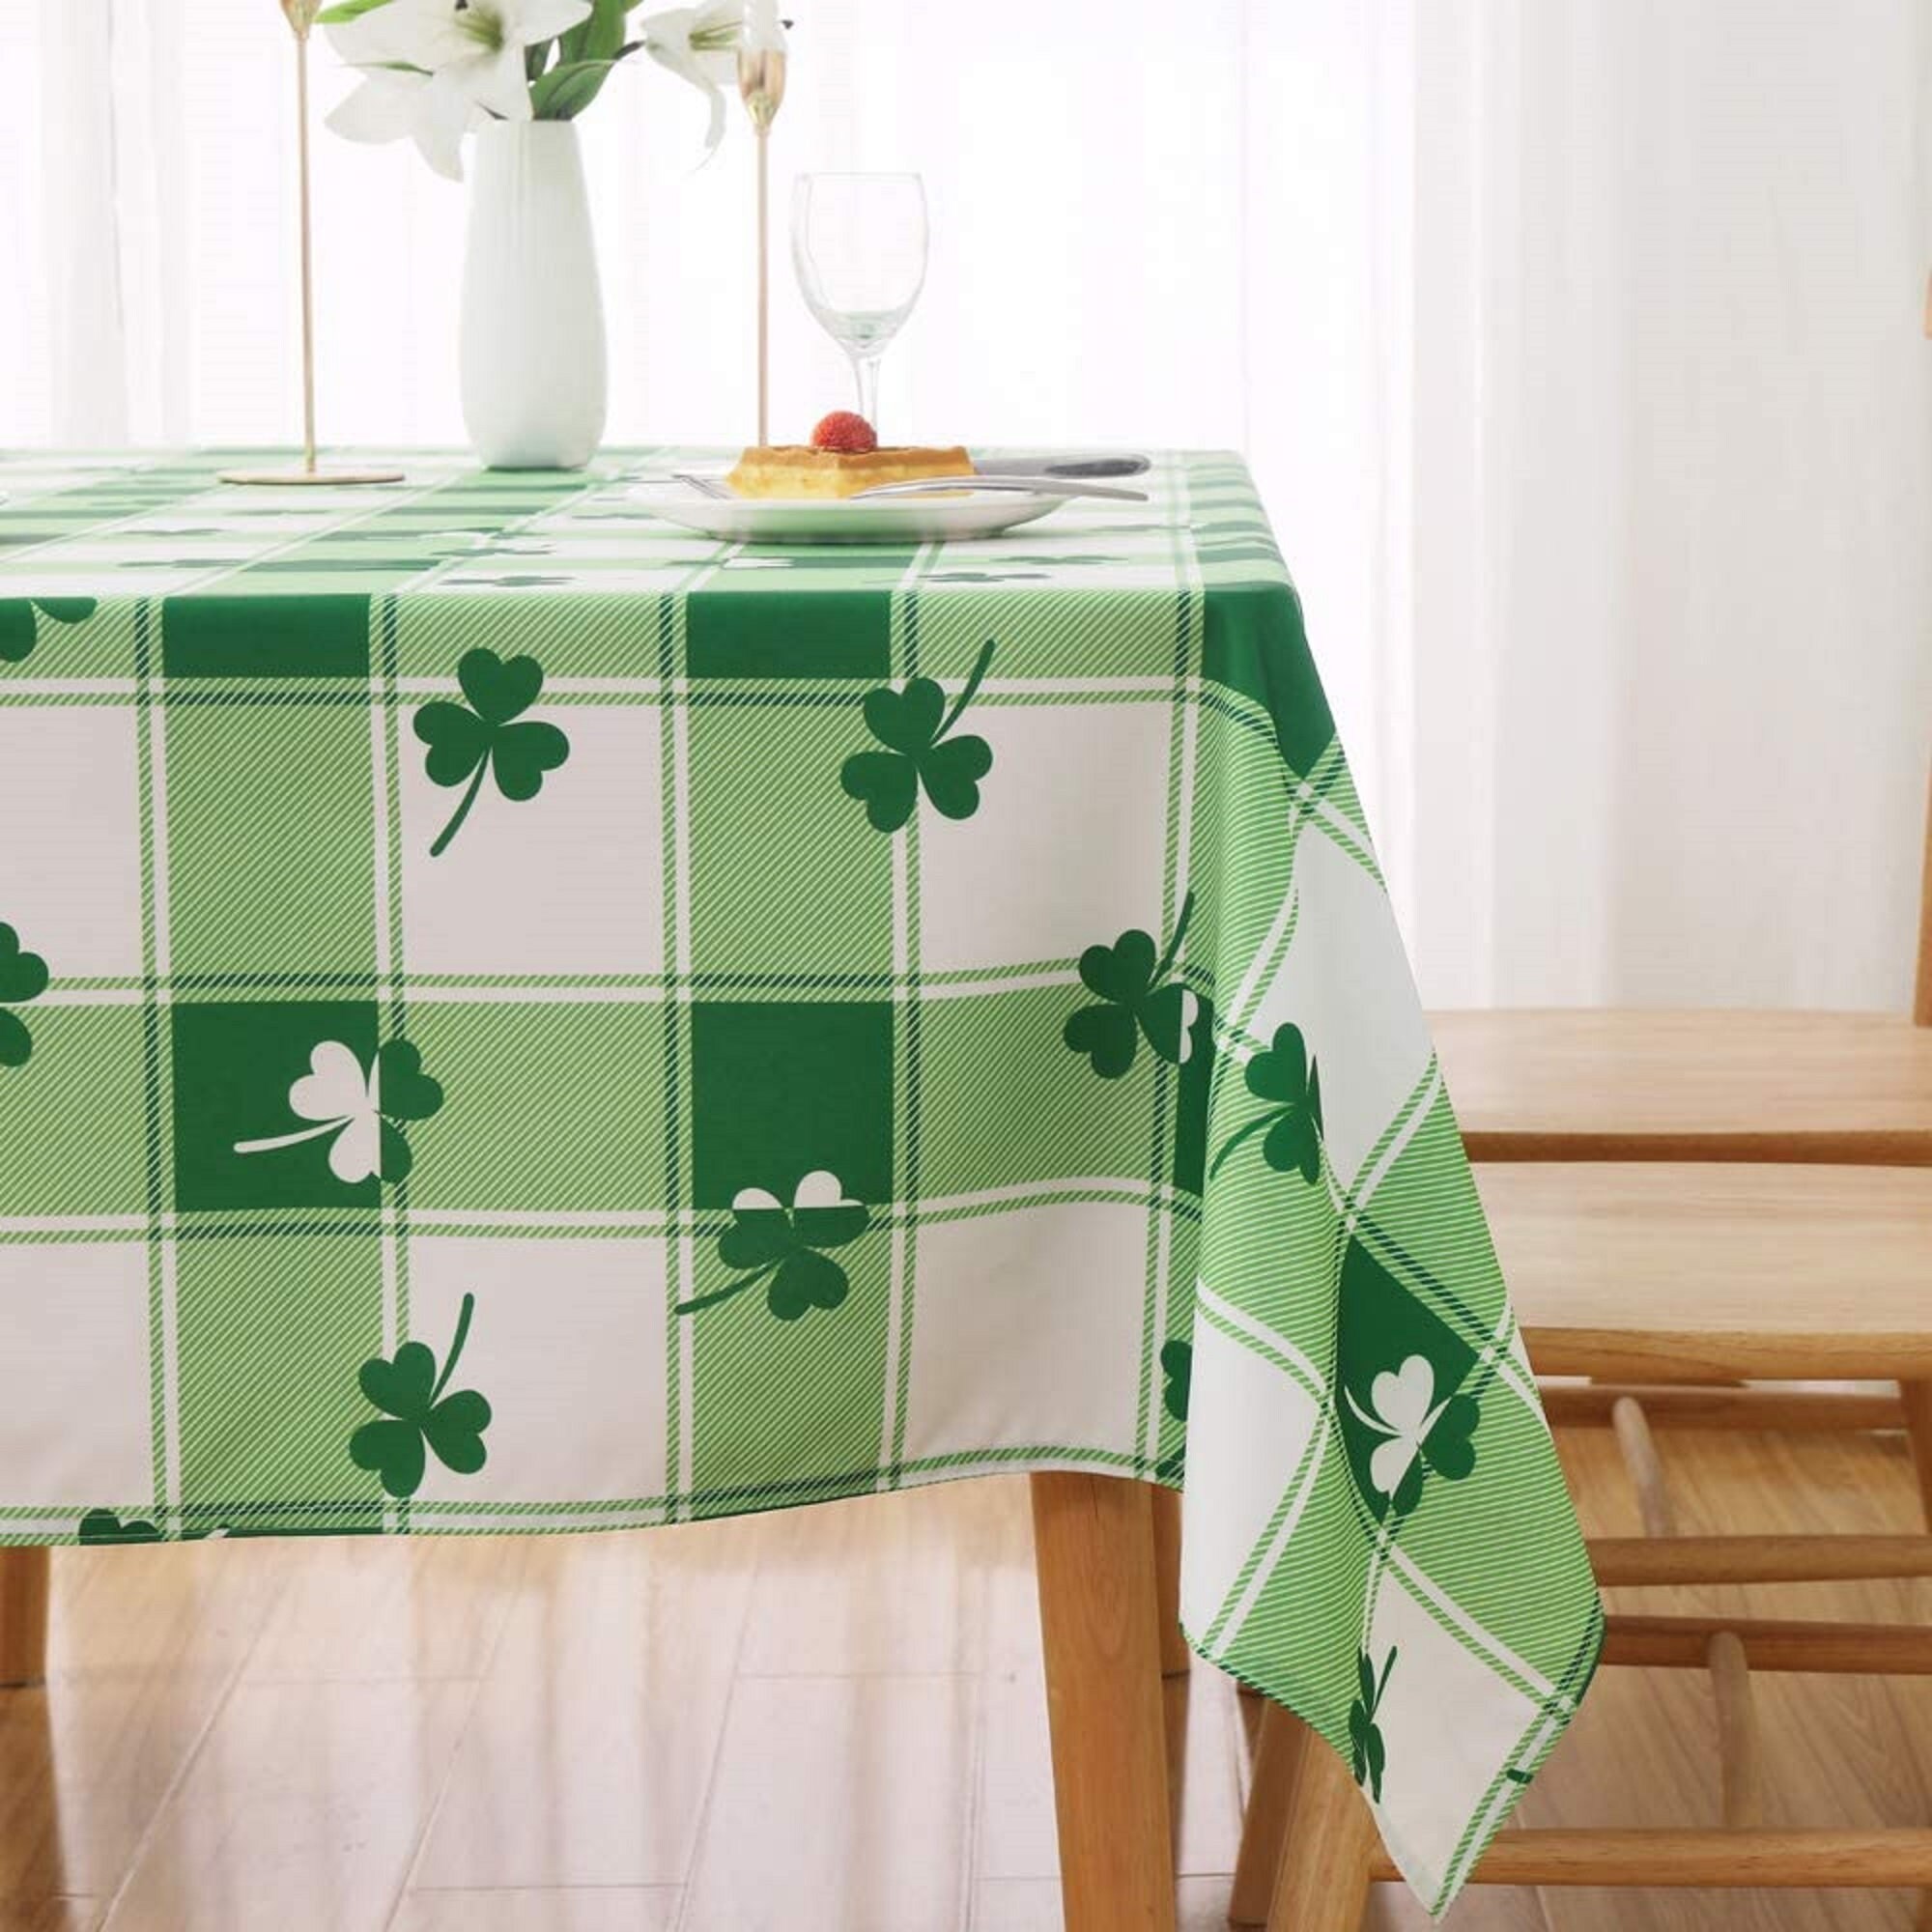 Simhomsen Irish Clover Table Runners for St Patrick’s Day and Spring Embroidered Shamrock Table Scarf 14 x 69 Inches 